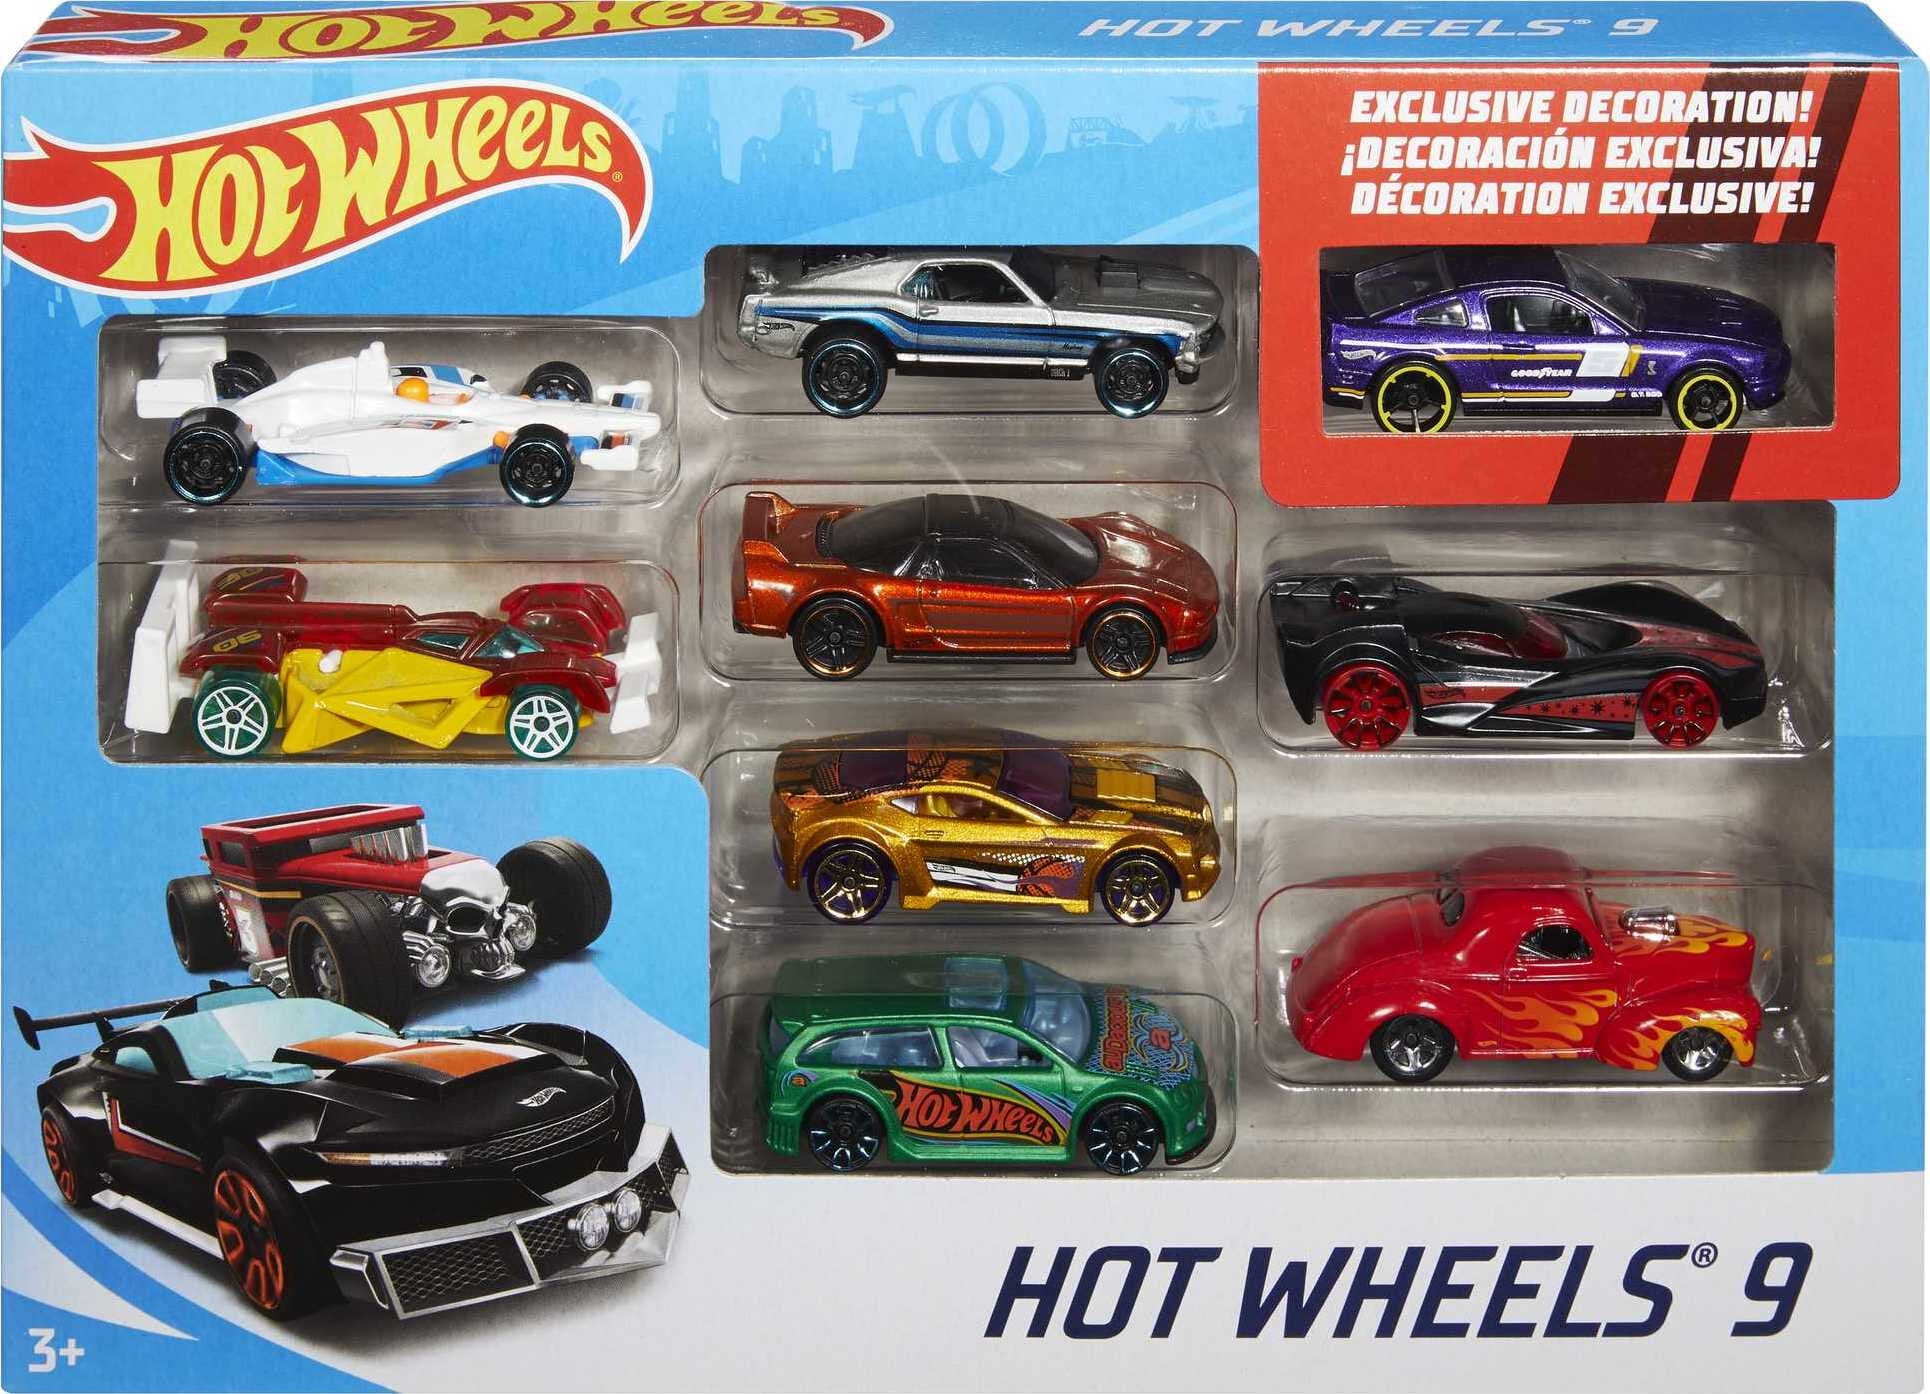 Hot Wheels Gift Set of 9 Toy Cars or Trucks in 1:64 Scale (Styles May Vary)